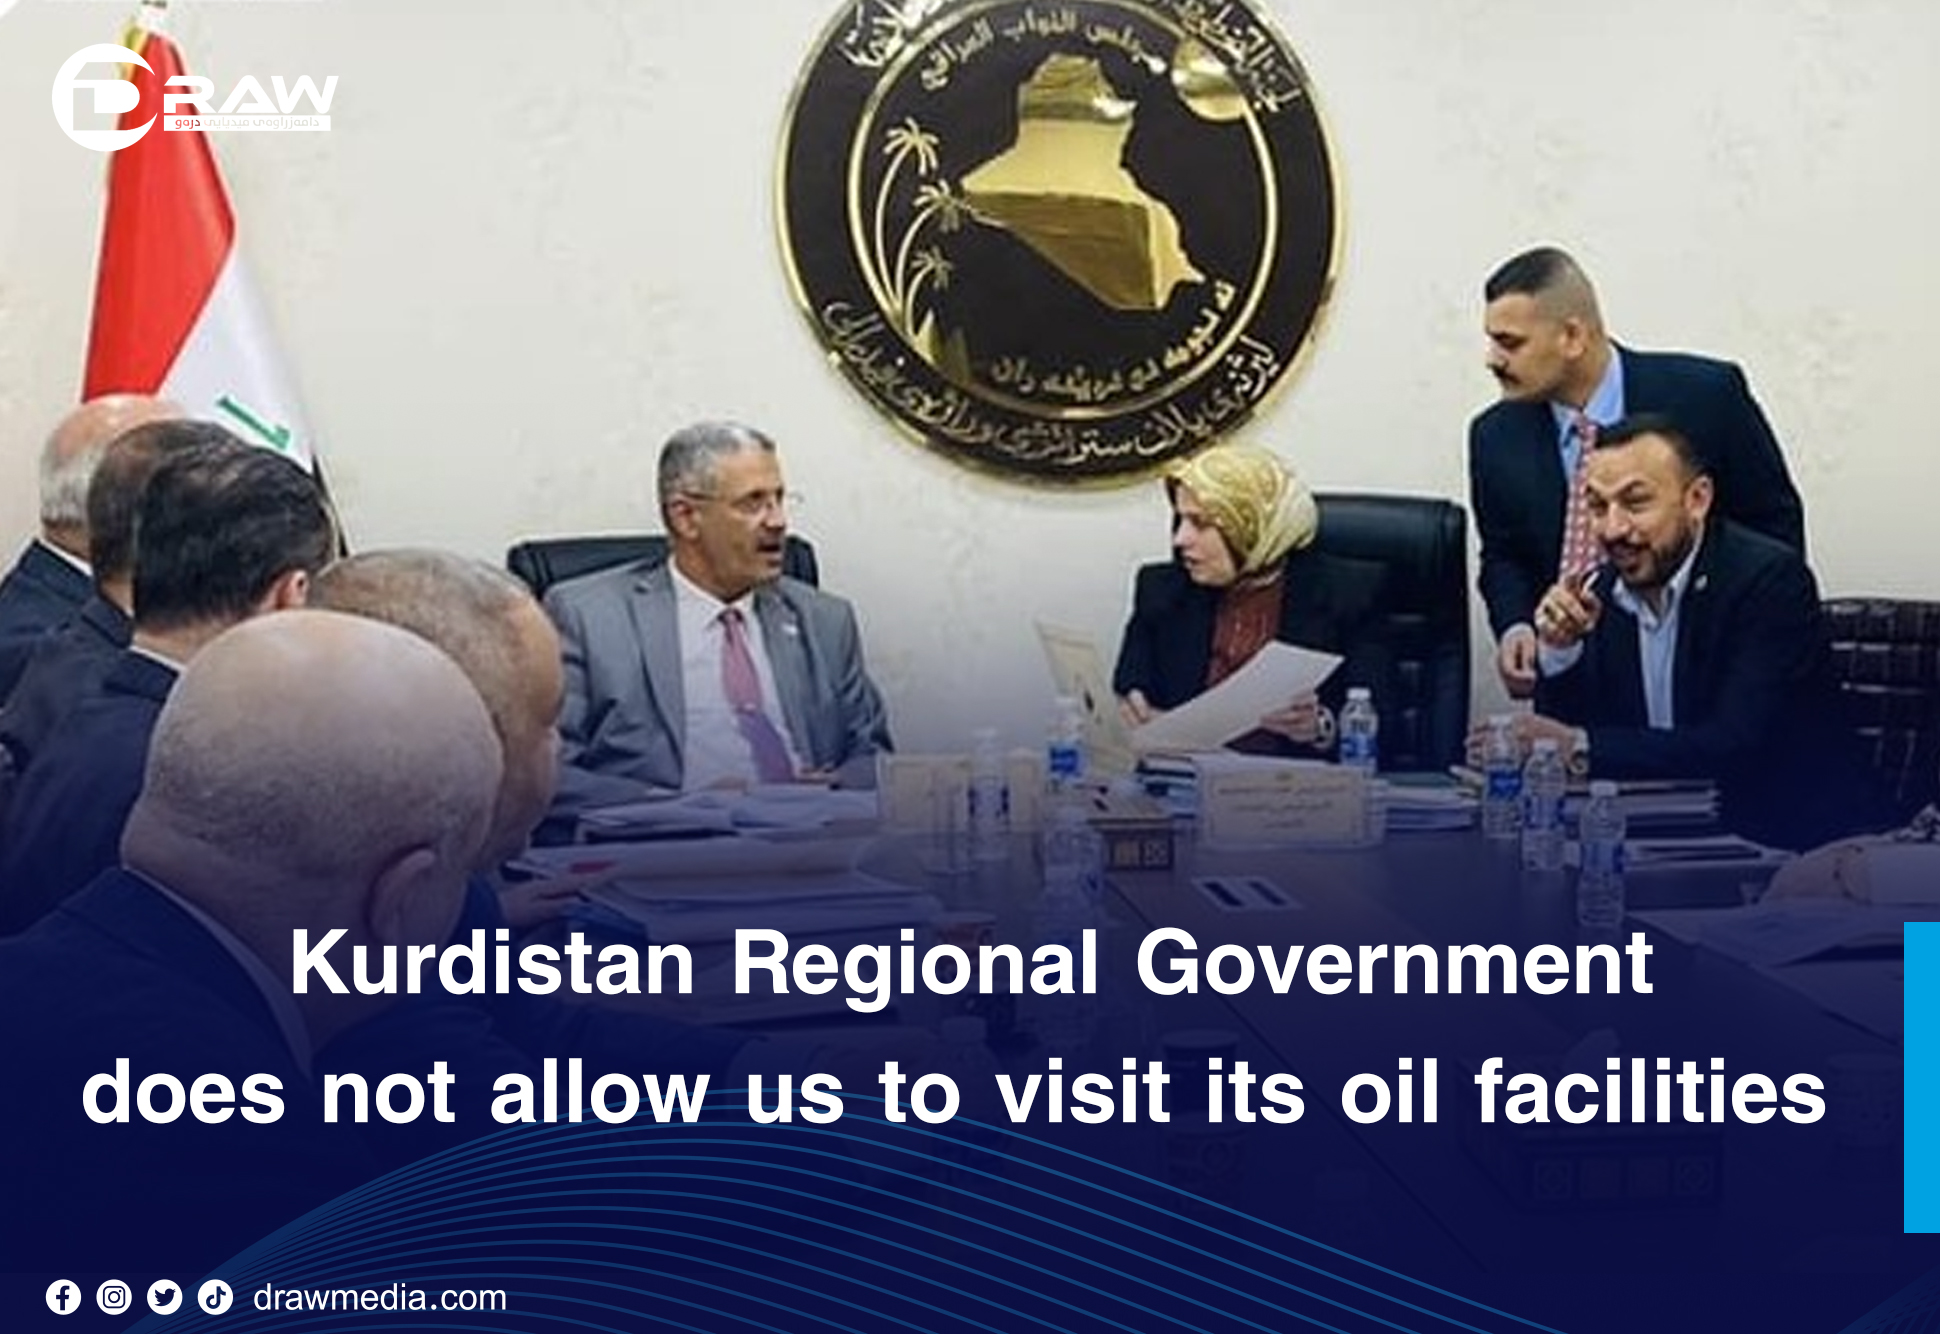 DrawMedia.net / "Kurdistan Regional Government does not allow us to visit its oil facilities"